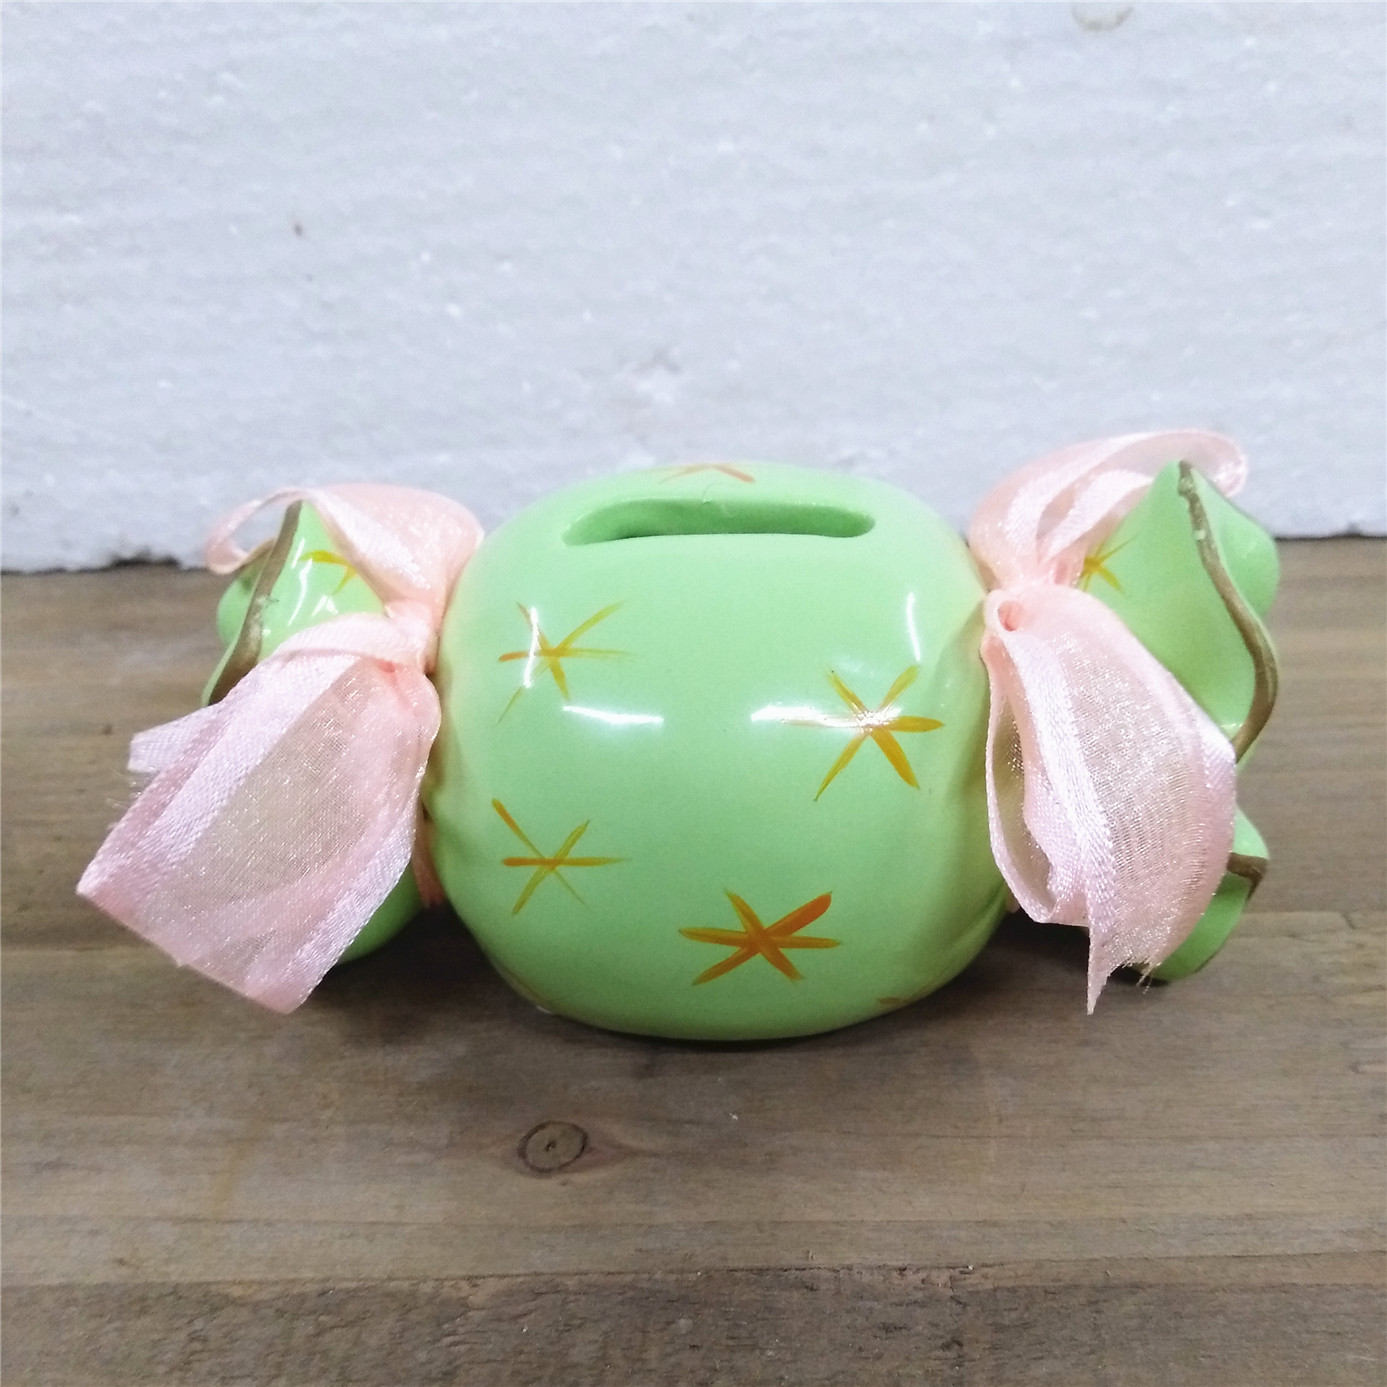 Traditional hand-made crafts  ceramic money box crafts  Candy shape money box for kids